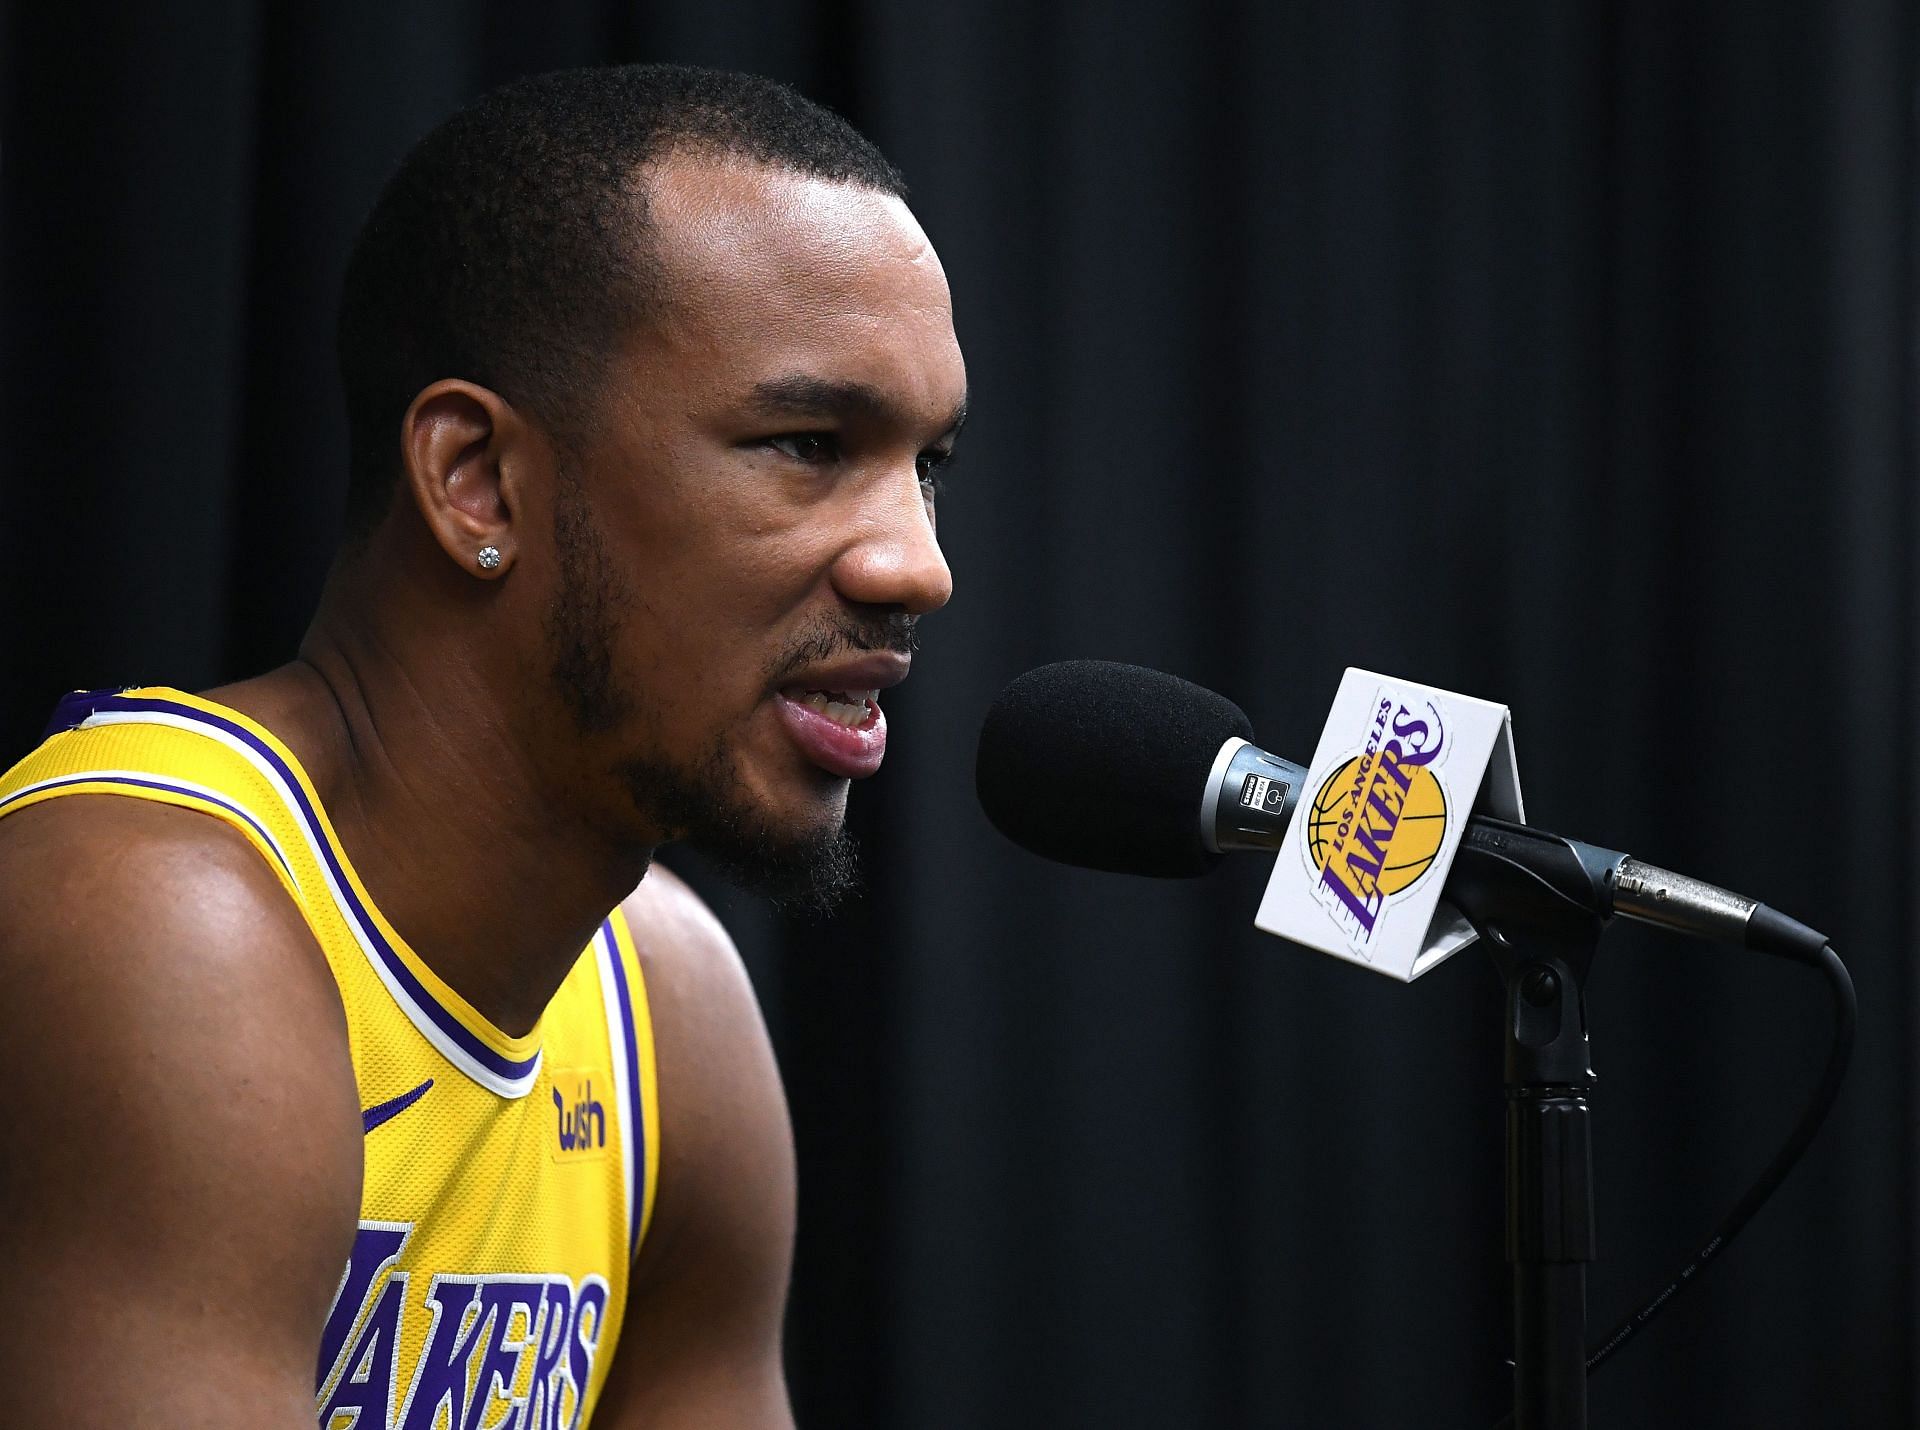 Avery Bradley was a key contributor for the LA Lakers during their 2020 NBA championship run